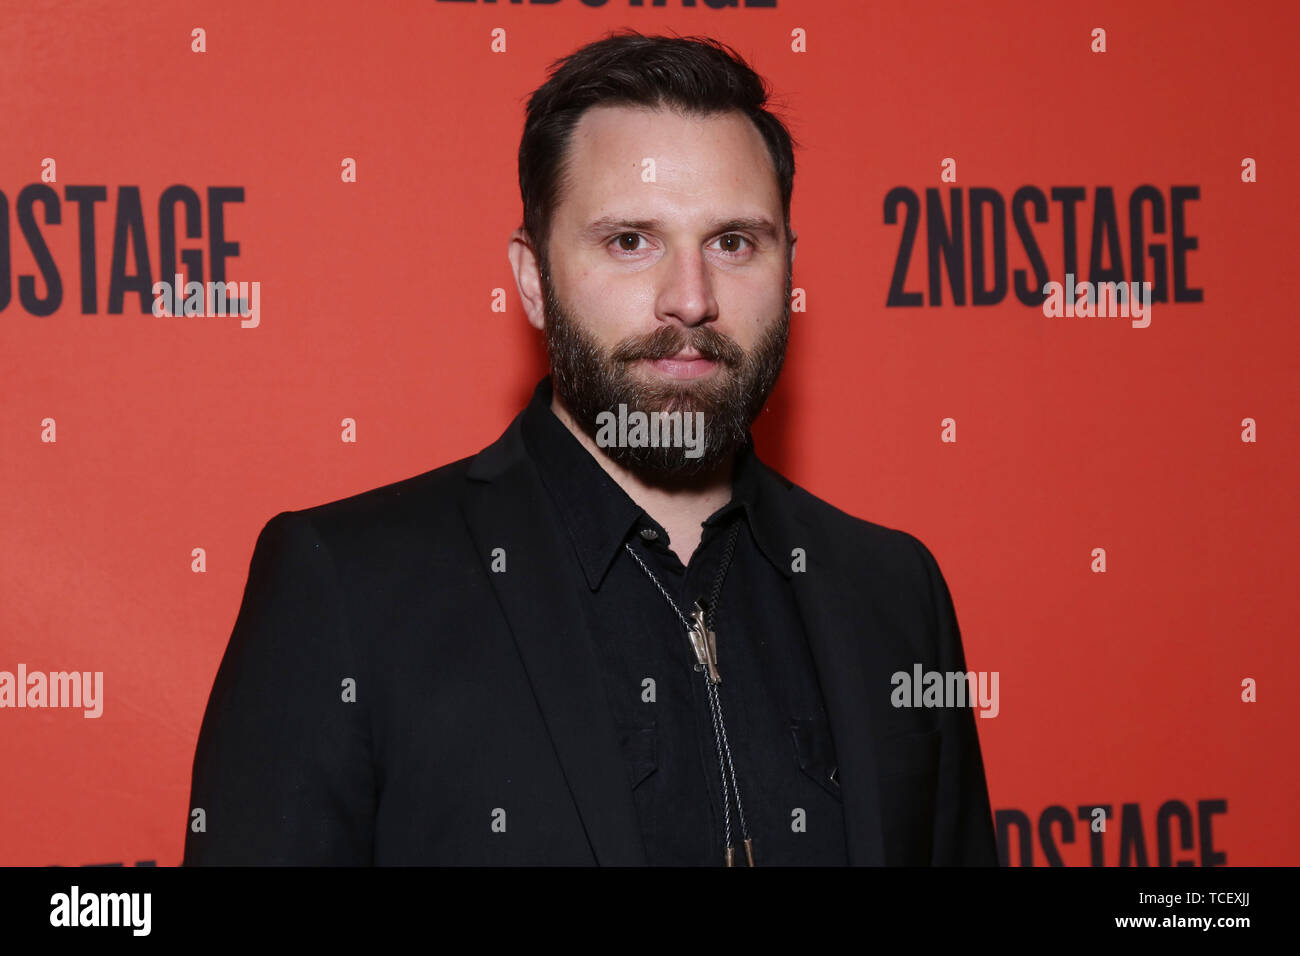 Second Stage Theater 40th Birthday Gala held at the Hammerstein Ballroom - Arrivals.  Featuring: Quincy Dunn-Baker Where: New York, New York, United States When: 07 May 2019 Credit: Joseph Marzullo/WENN.com Stock Photo